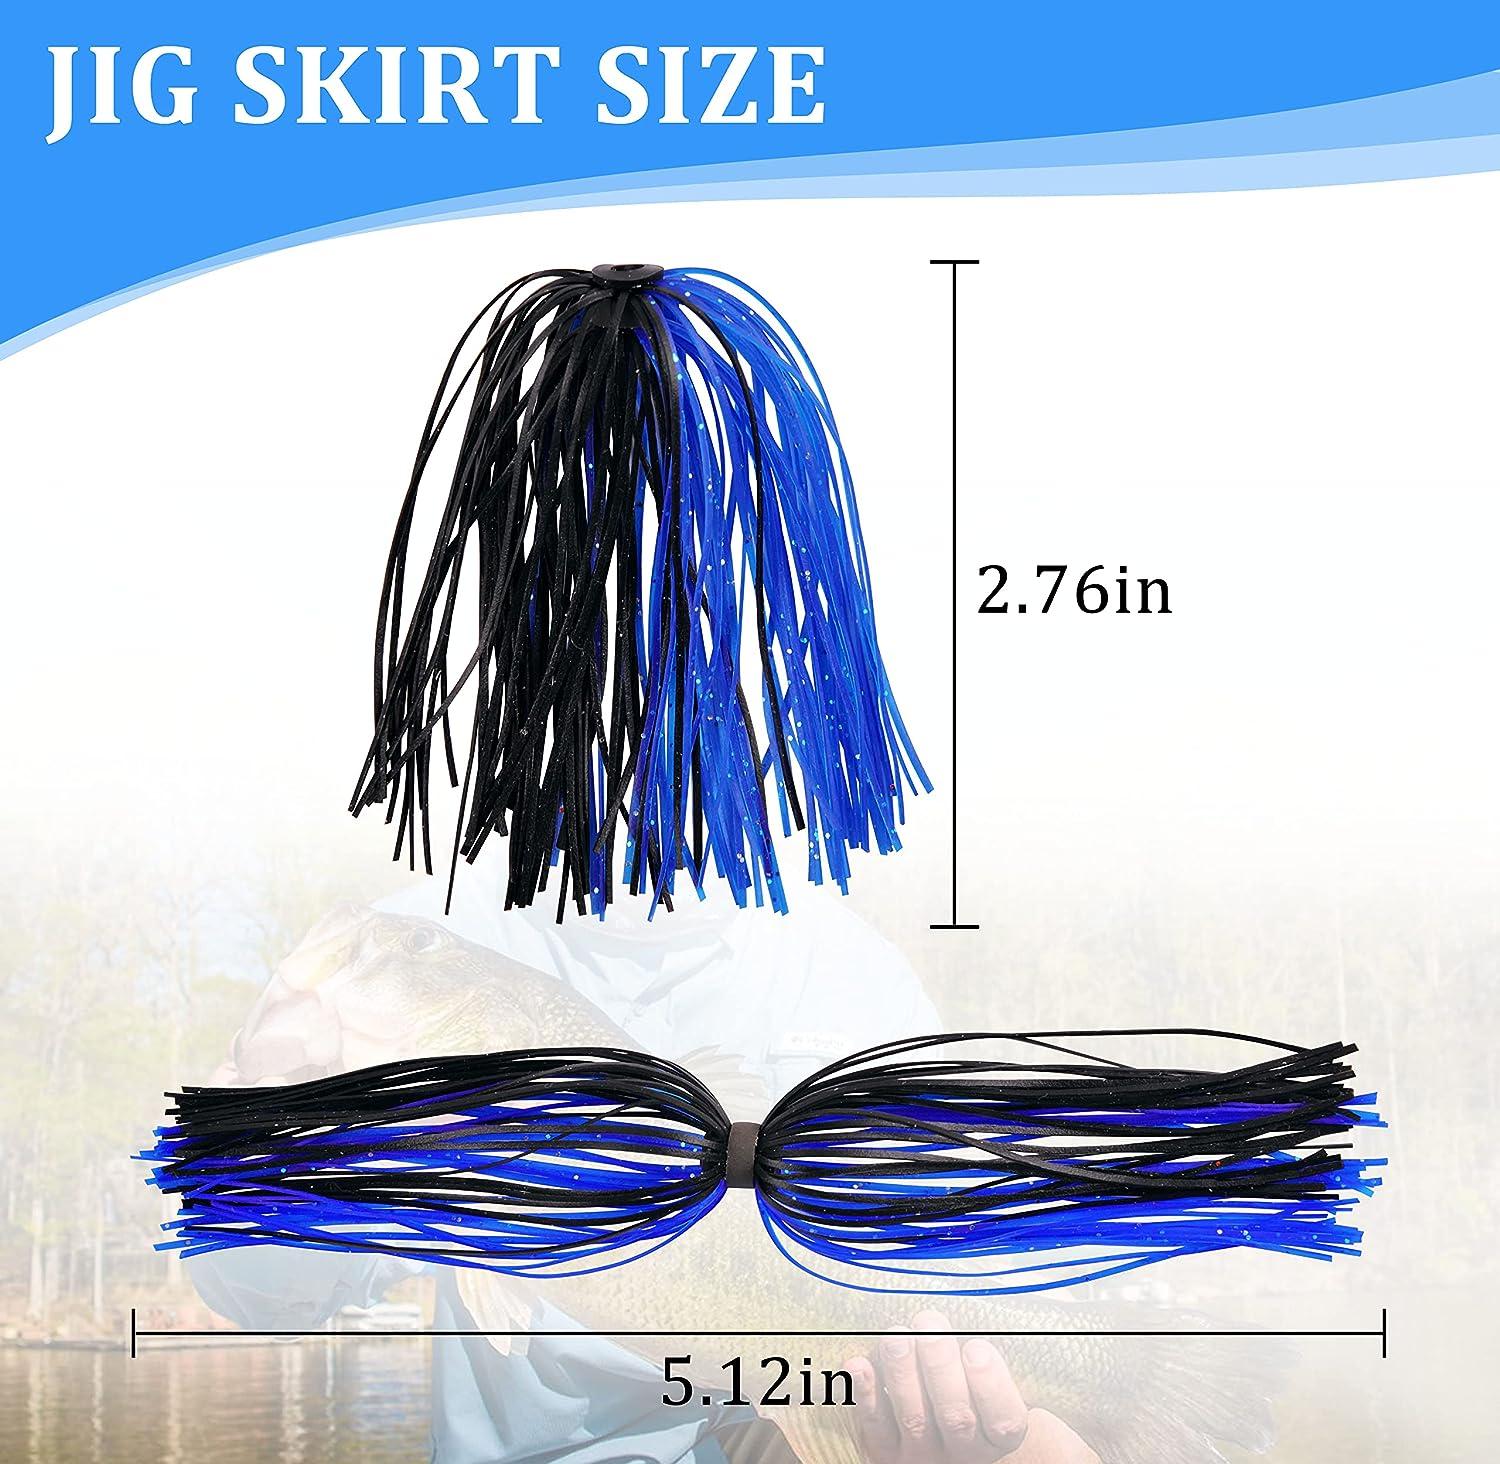 Silicone Jig Skirts, 1 Spinnerbait Skirts Replacement Kit, DIY